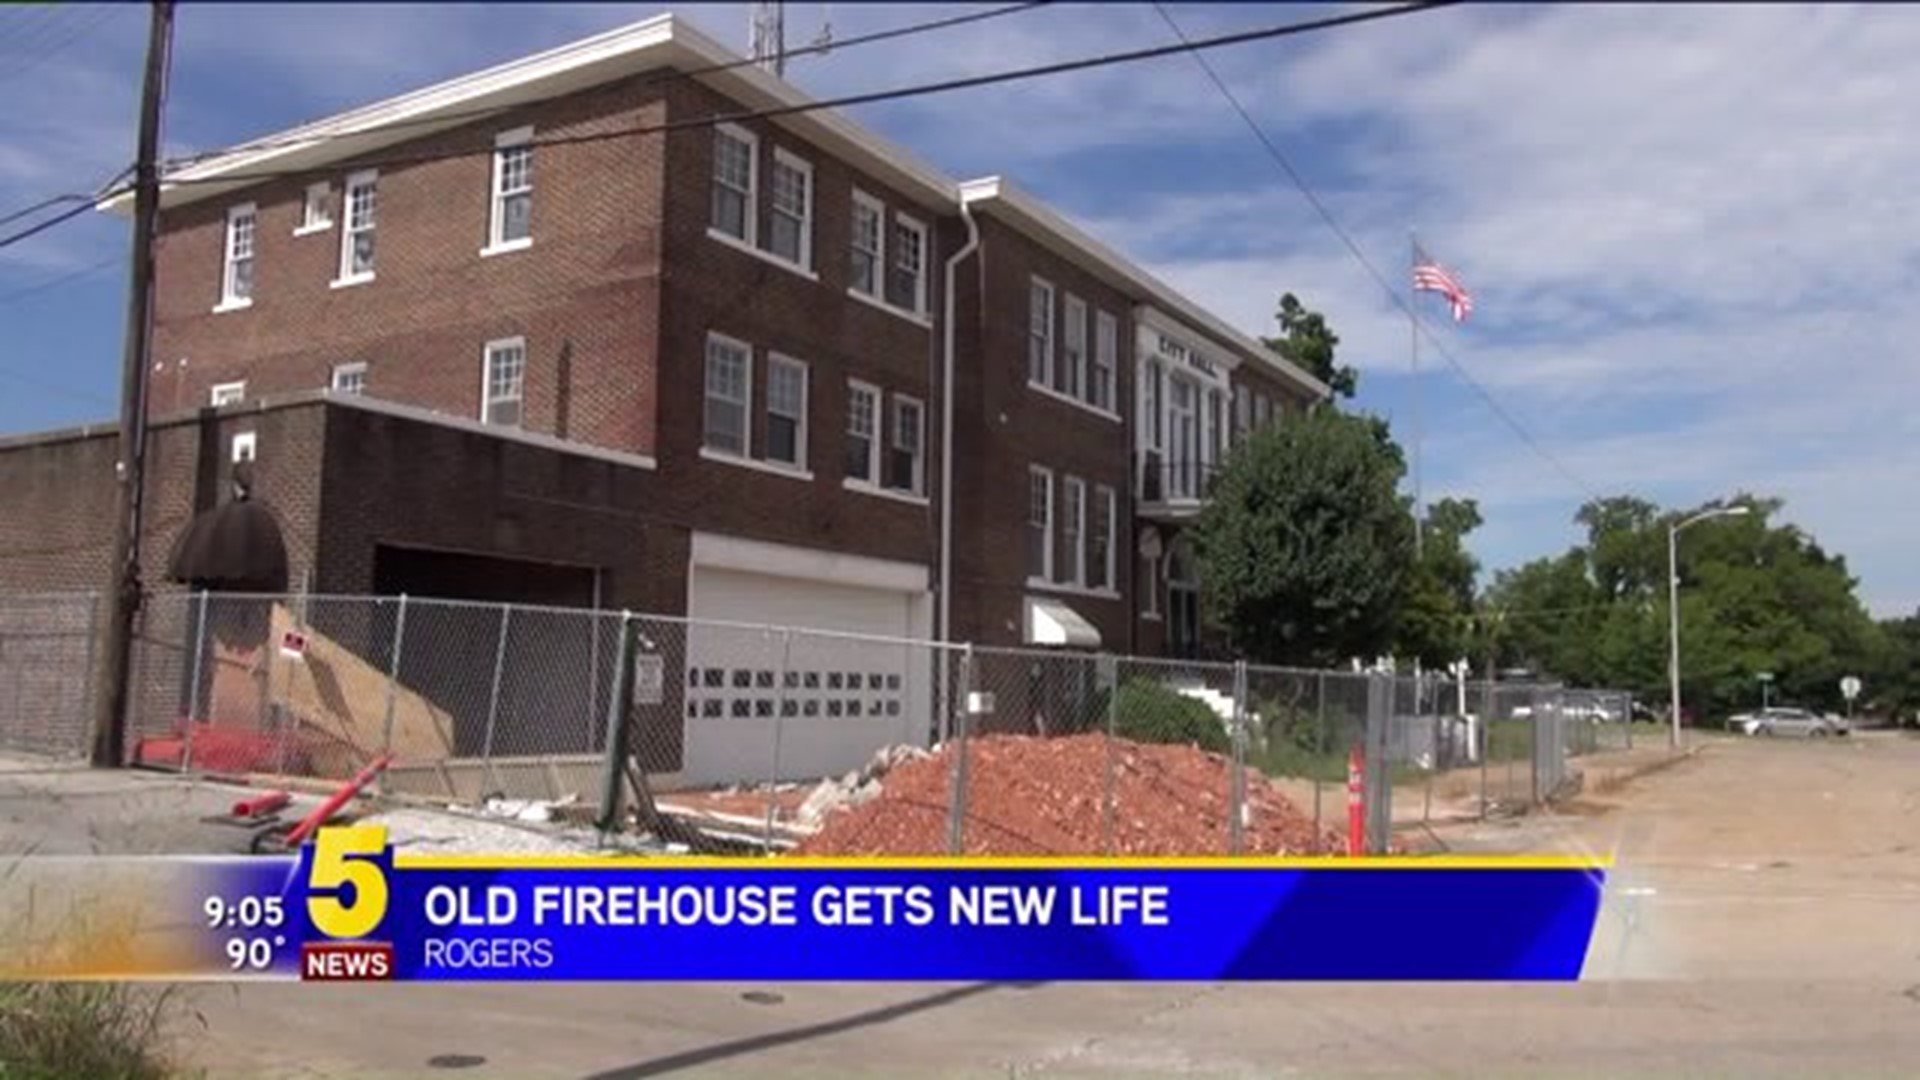 Old Firehouse Gets New Life